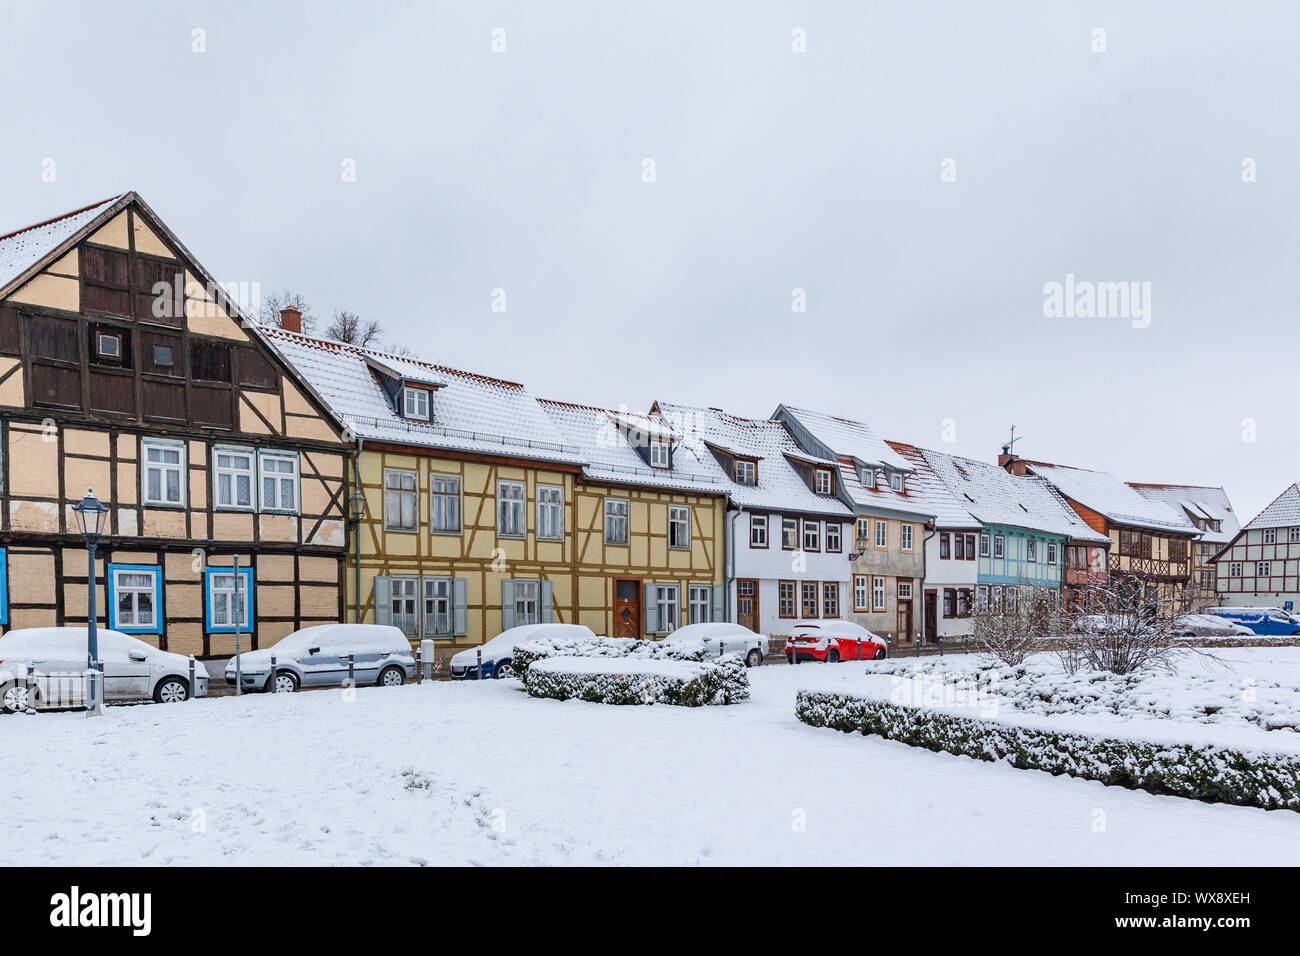 World Heritage Site Quedlinburg Impressions of the Old Town Stock Photo